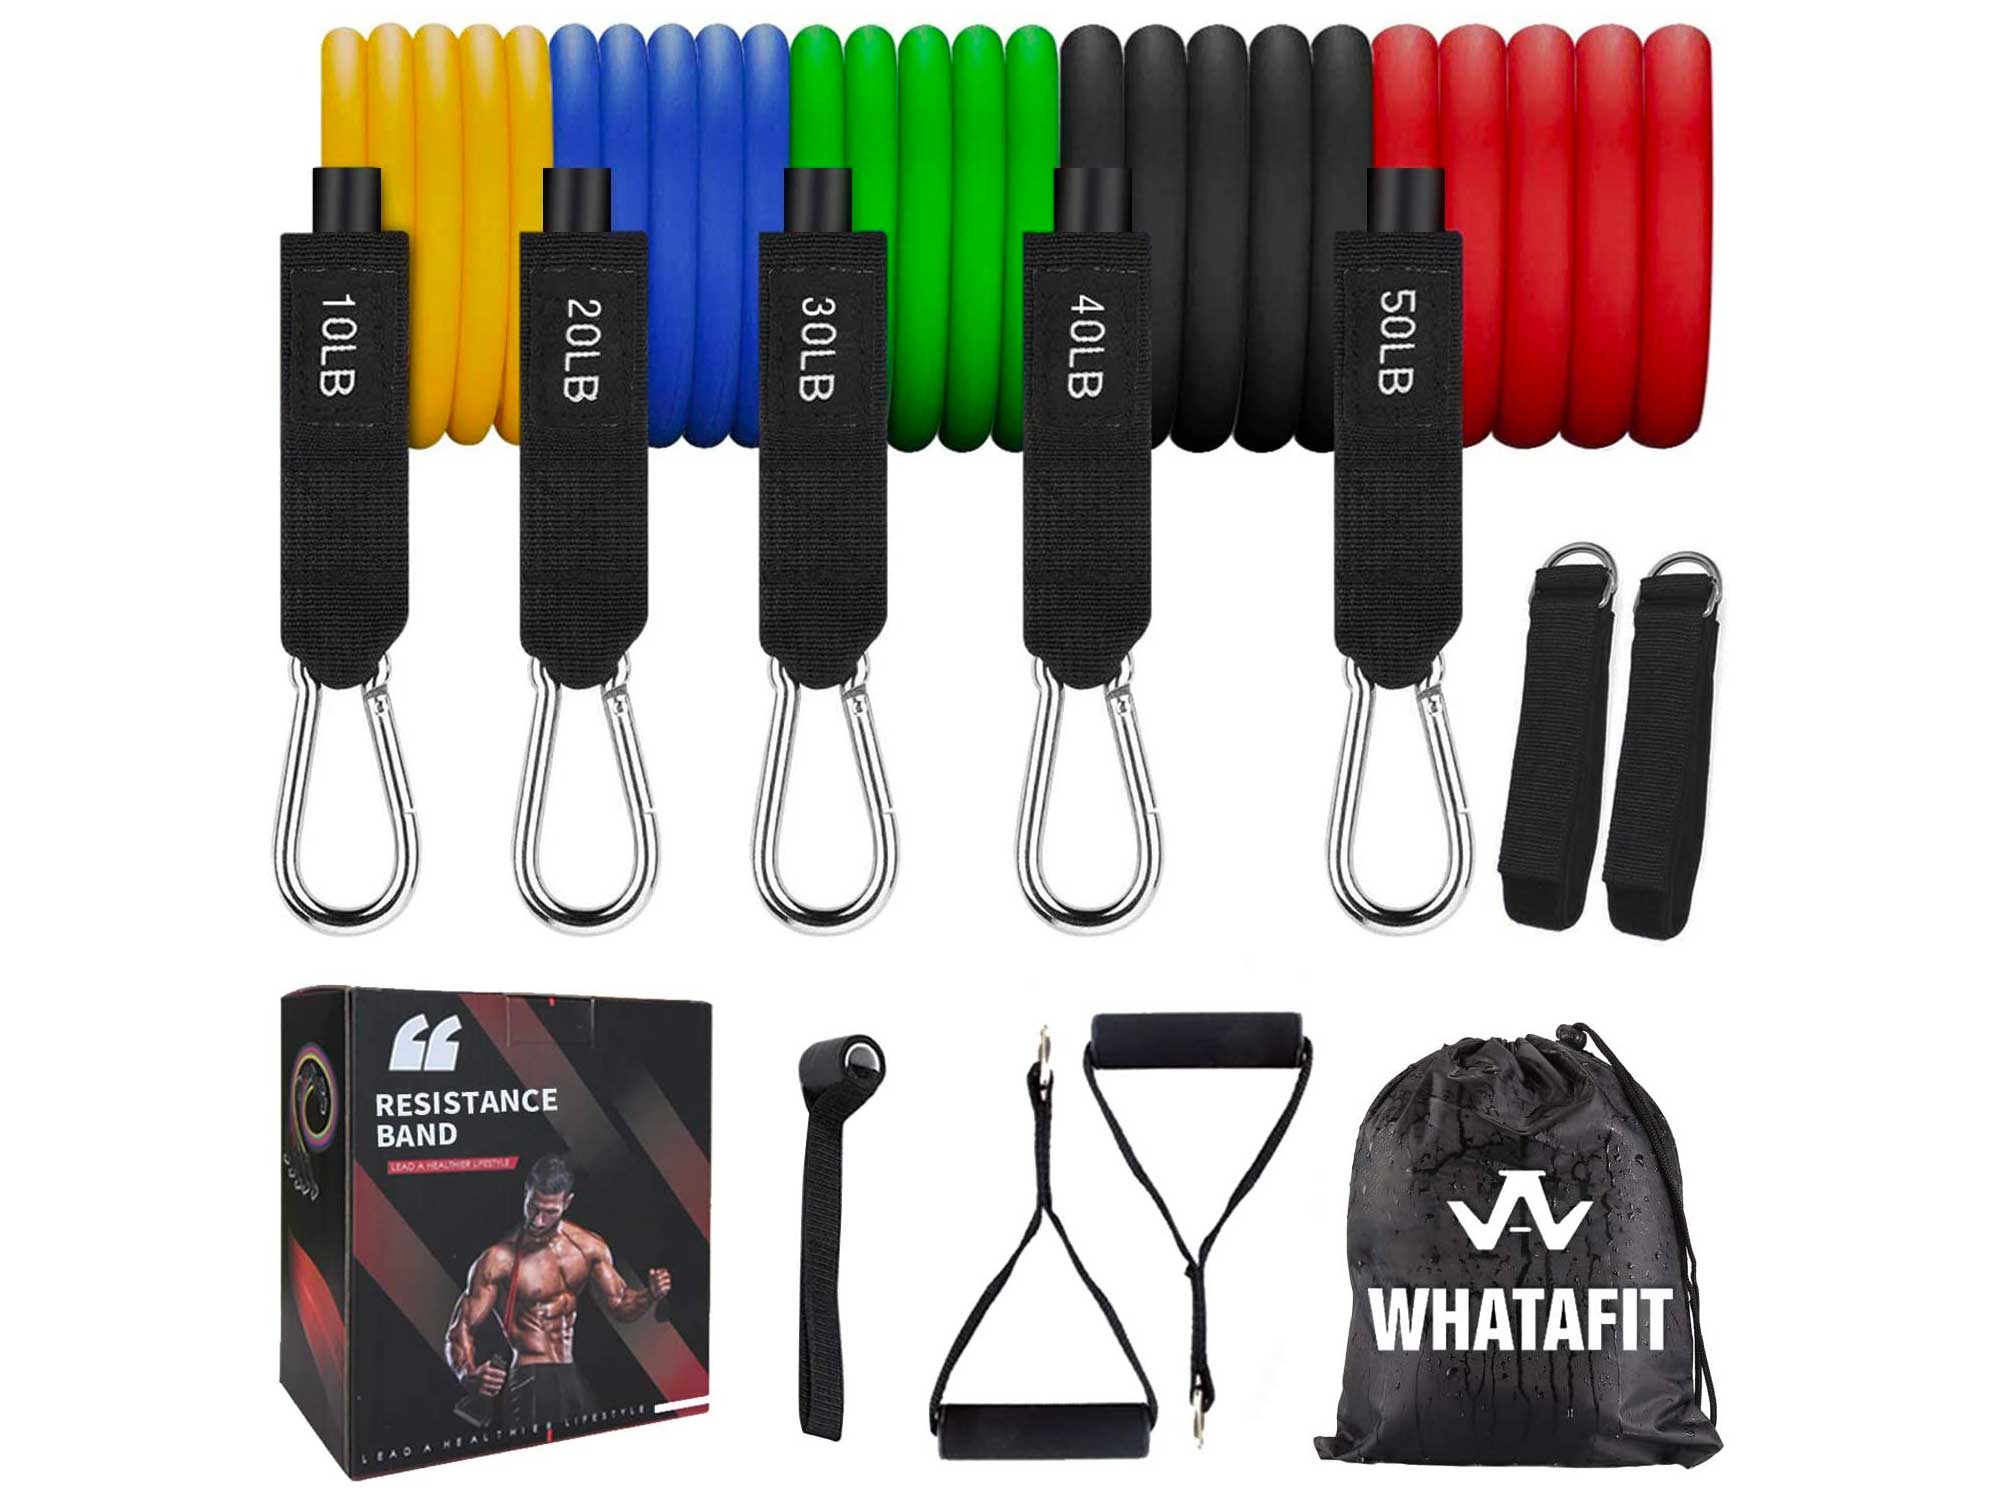 Whatafit Resistance Bands Set (11pcs), Exercise Bands with Door Anchor, Handles, Waterproof Carry Bag, Legs Ankle Straps for Resistance Training, Physical Therapy, Home Workouts